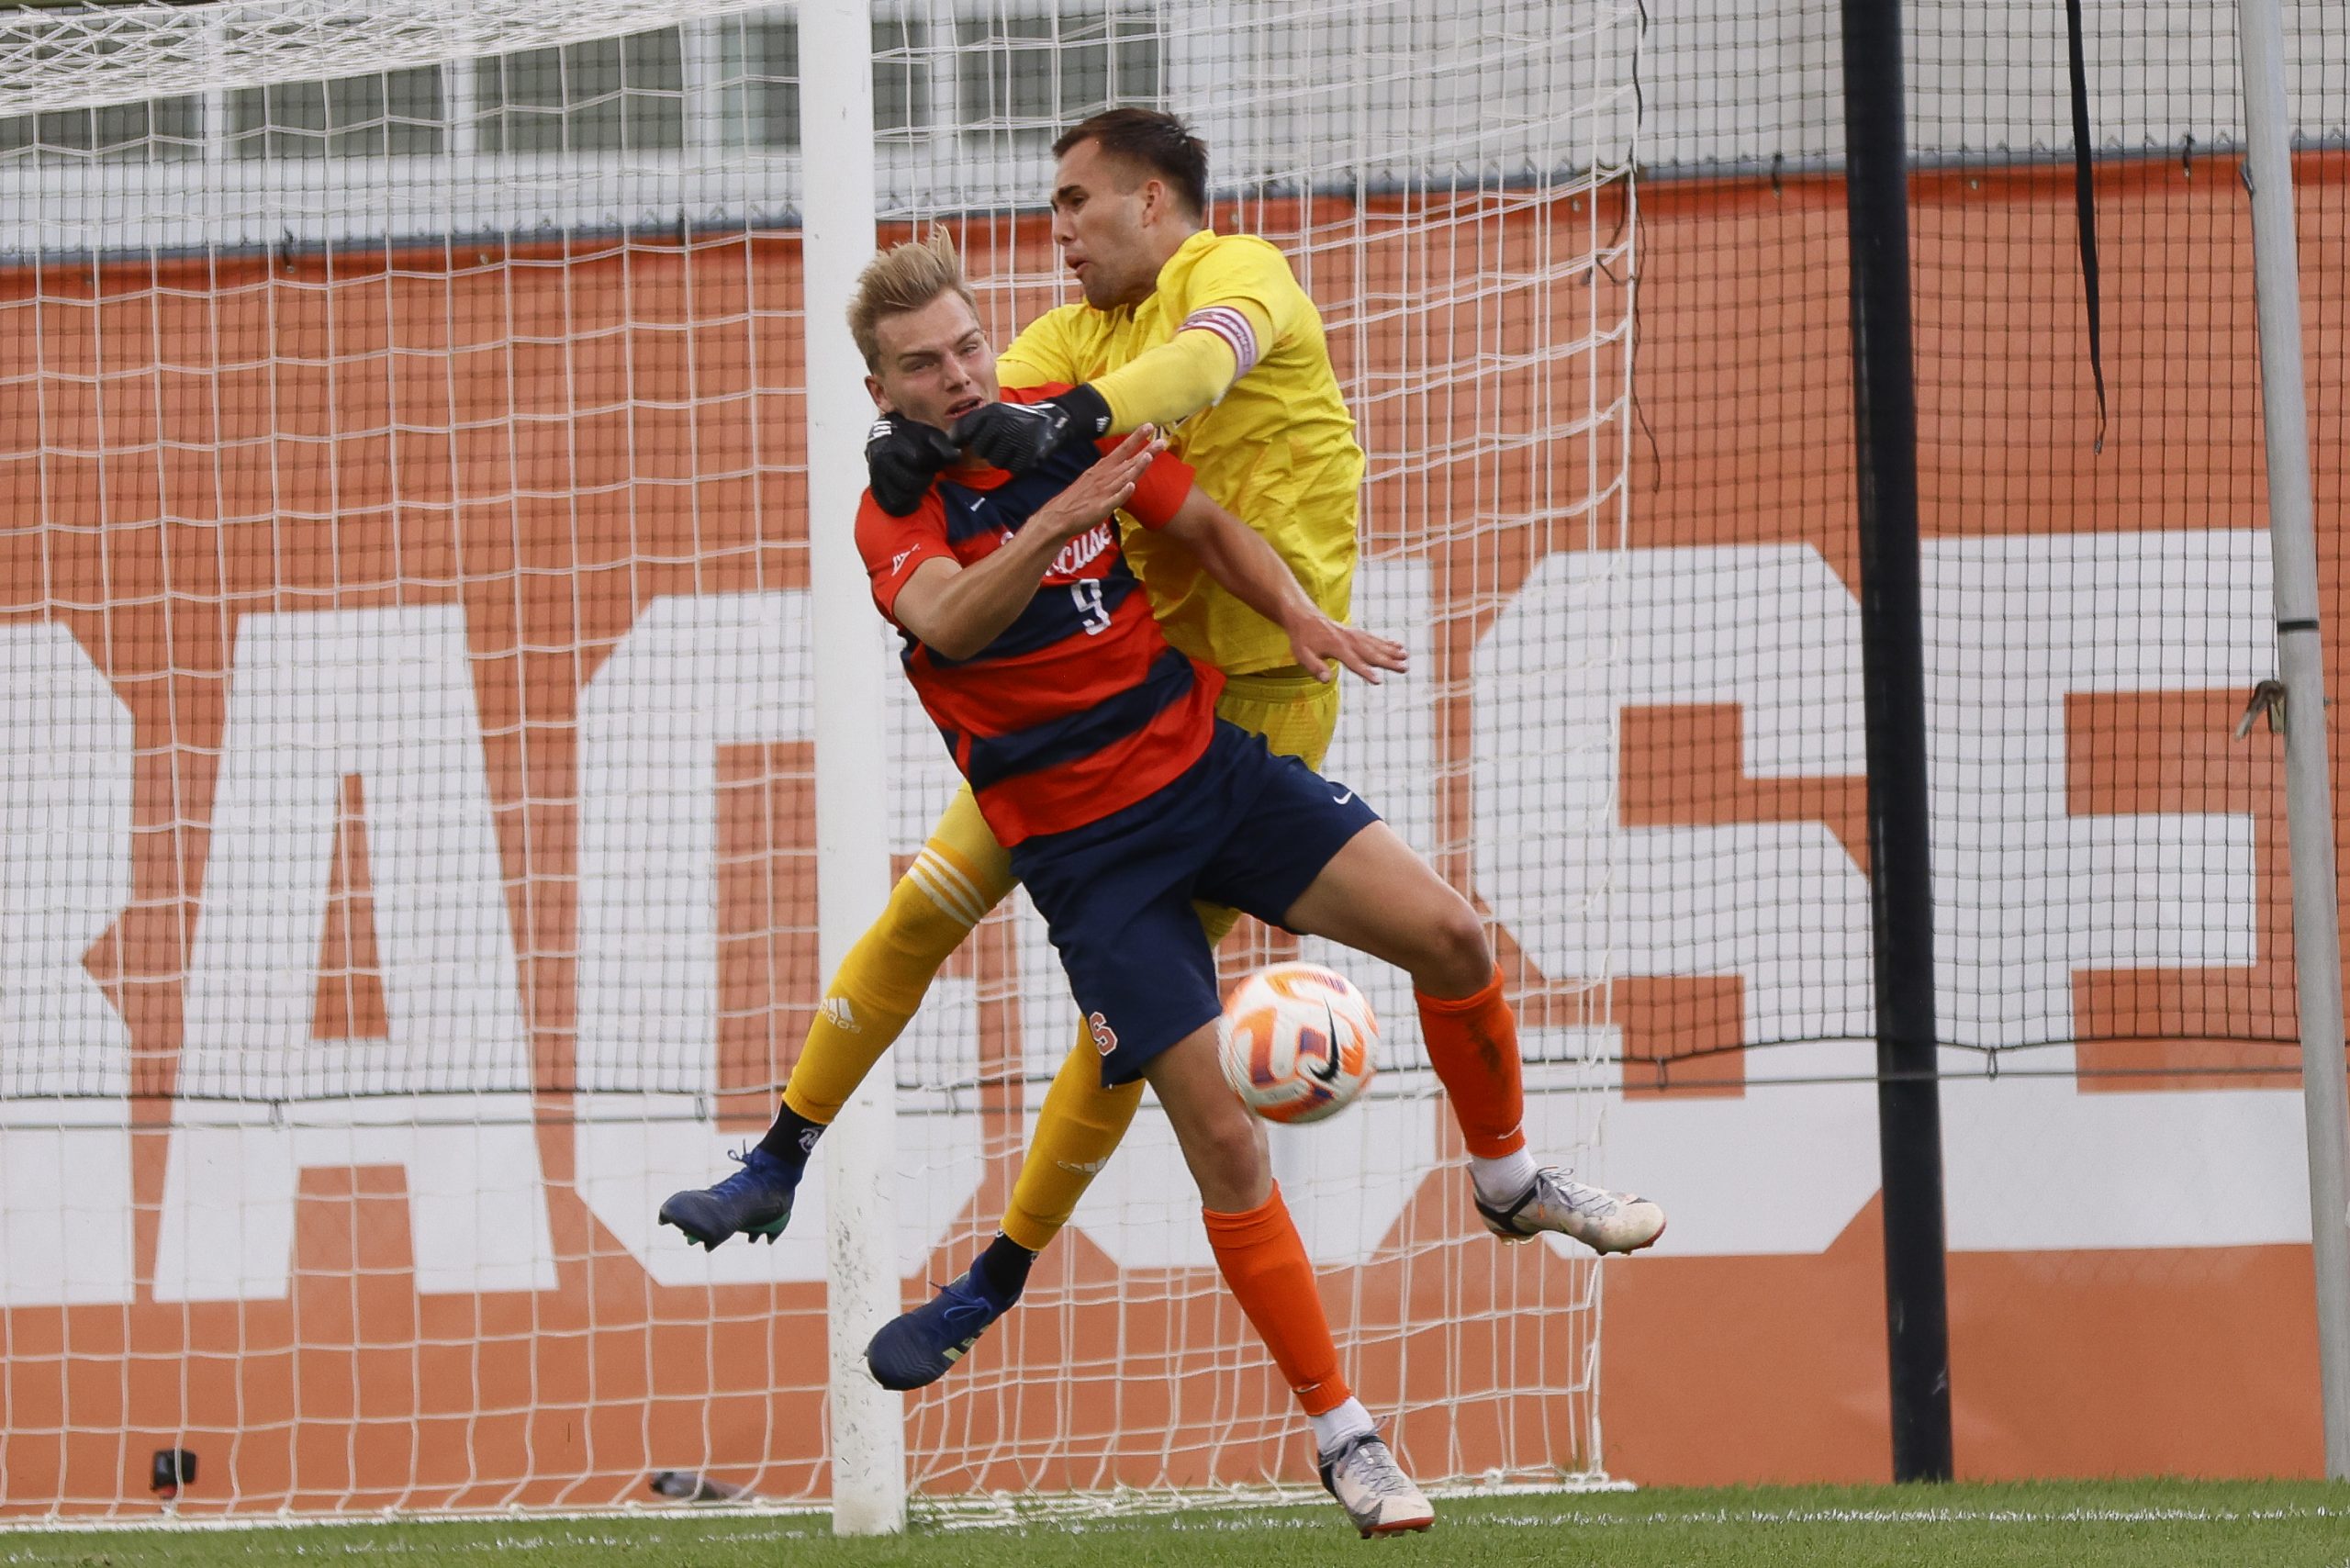 Iona keeper Juan Alfaro Monge (1) tries to knock a ball away from goal as Syracuse's Julius Rauch (9) looks to gain possession and find the back of the net during a non-conference men's soccer game on Thursday at SU Soccer Stadium.